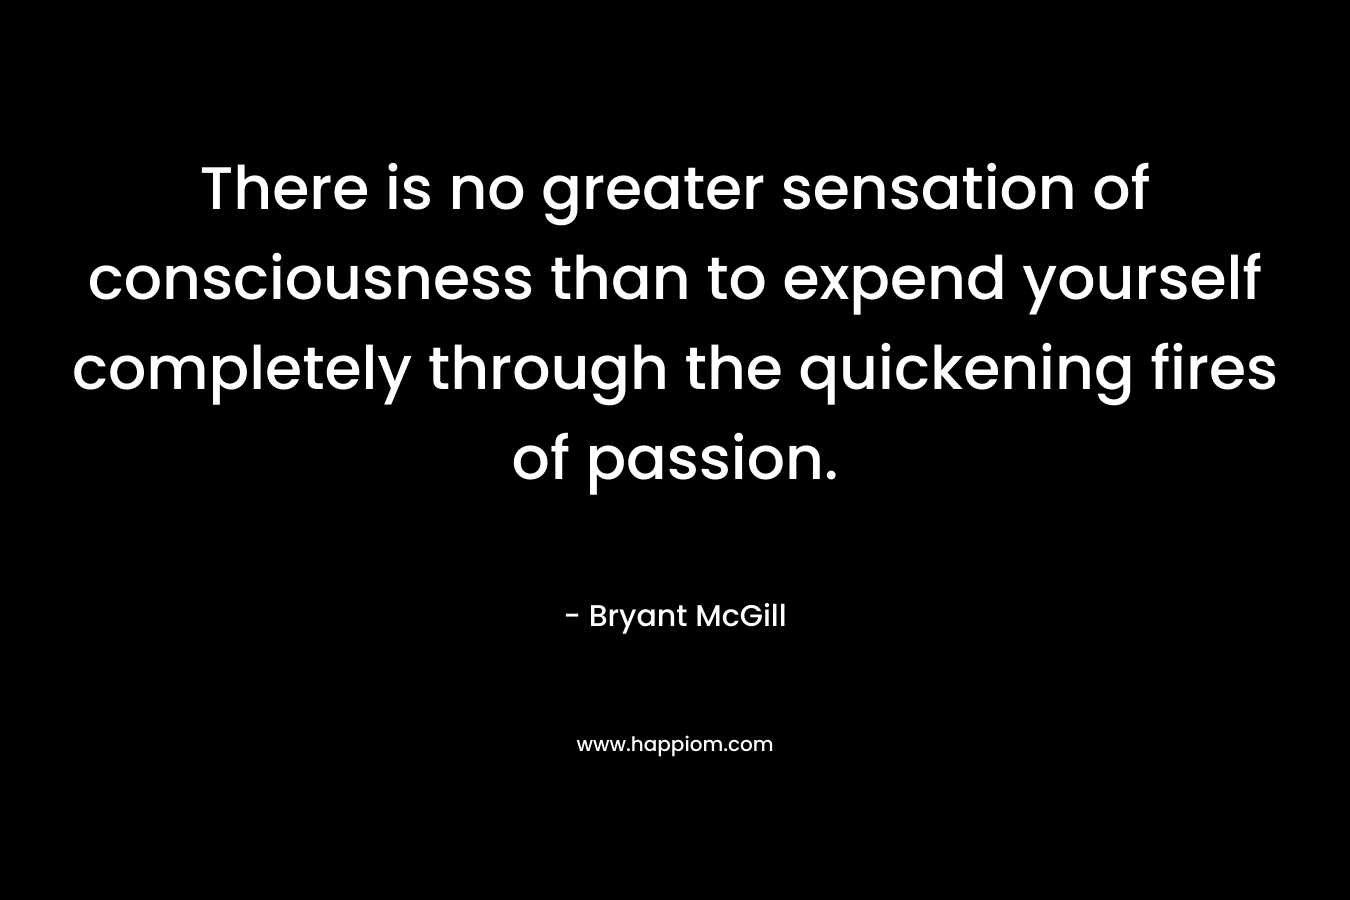 There is no greater sensation of consciousness than to expend yourself completely through the quickening fires of passion. – Bryant McGill